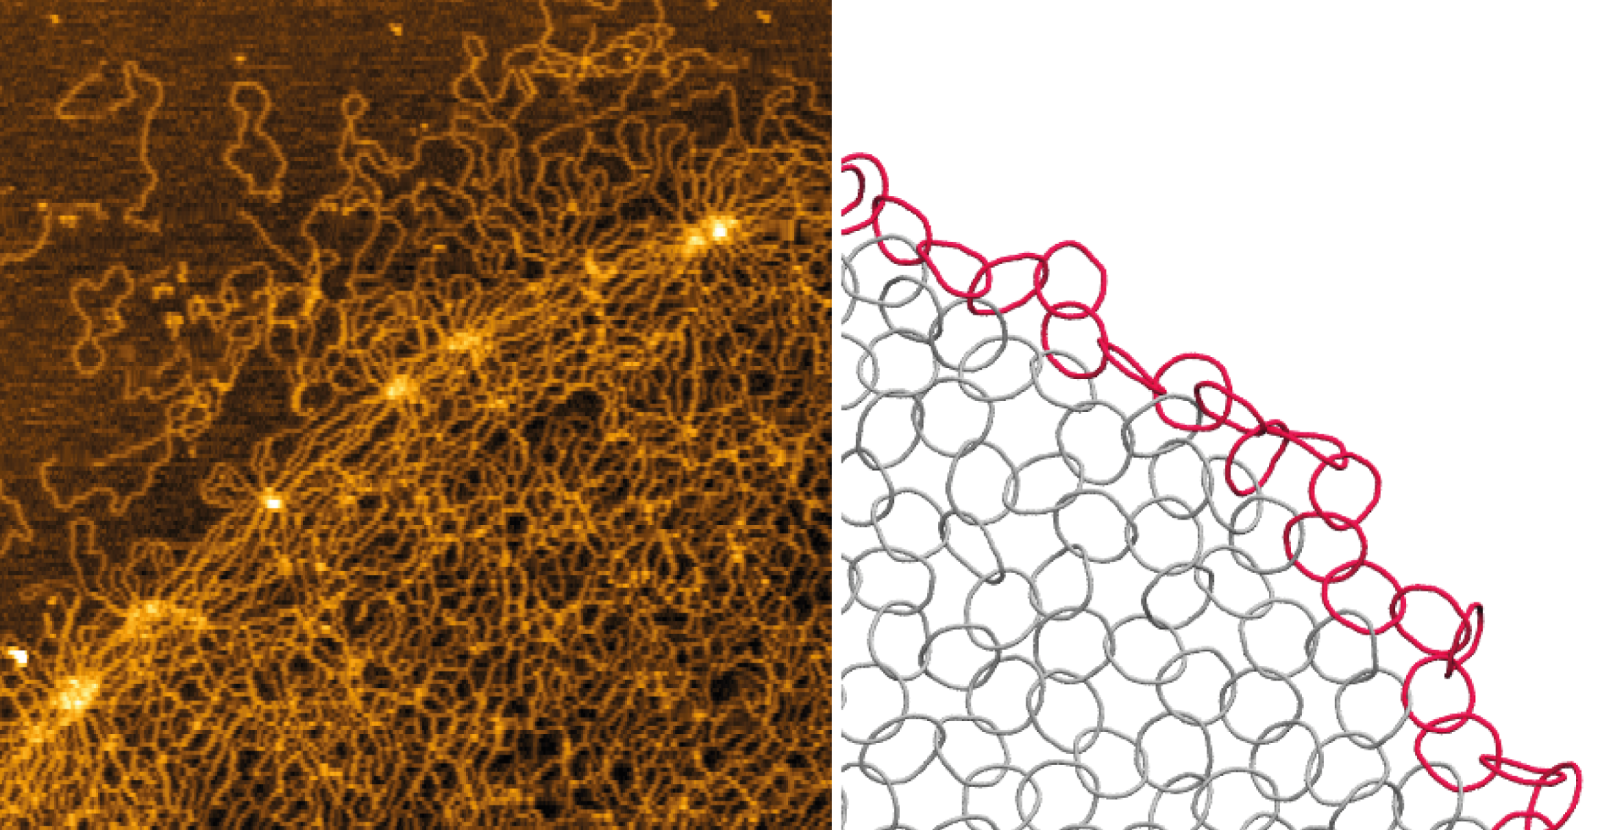 As seen under an atomic force microscope (left hand image) and simulated (right hand side), with red links representing the periphery of the network and grey links representing the inner structure.